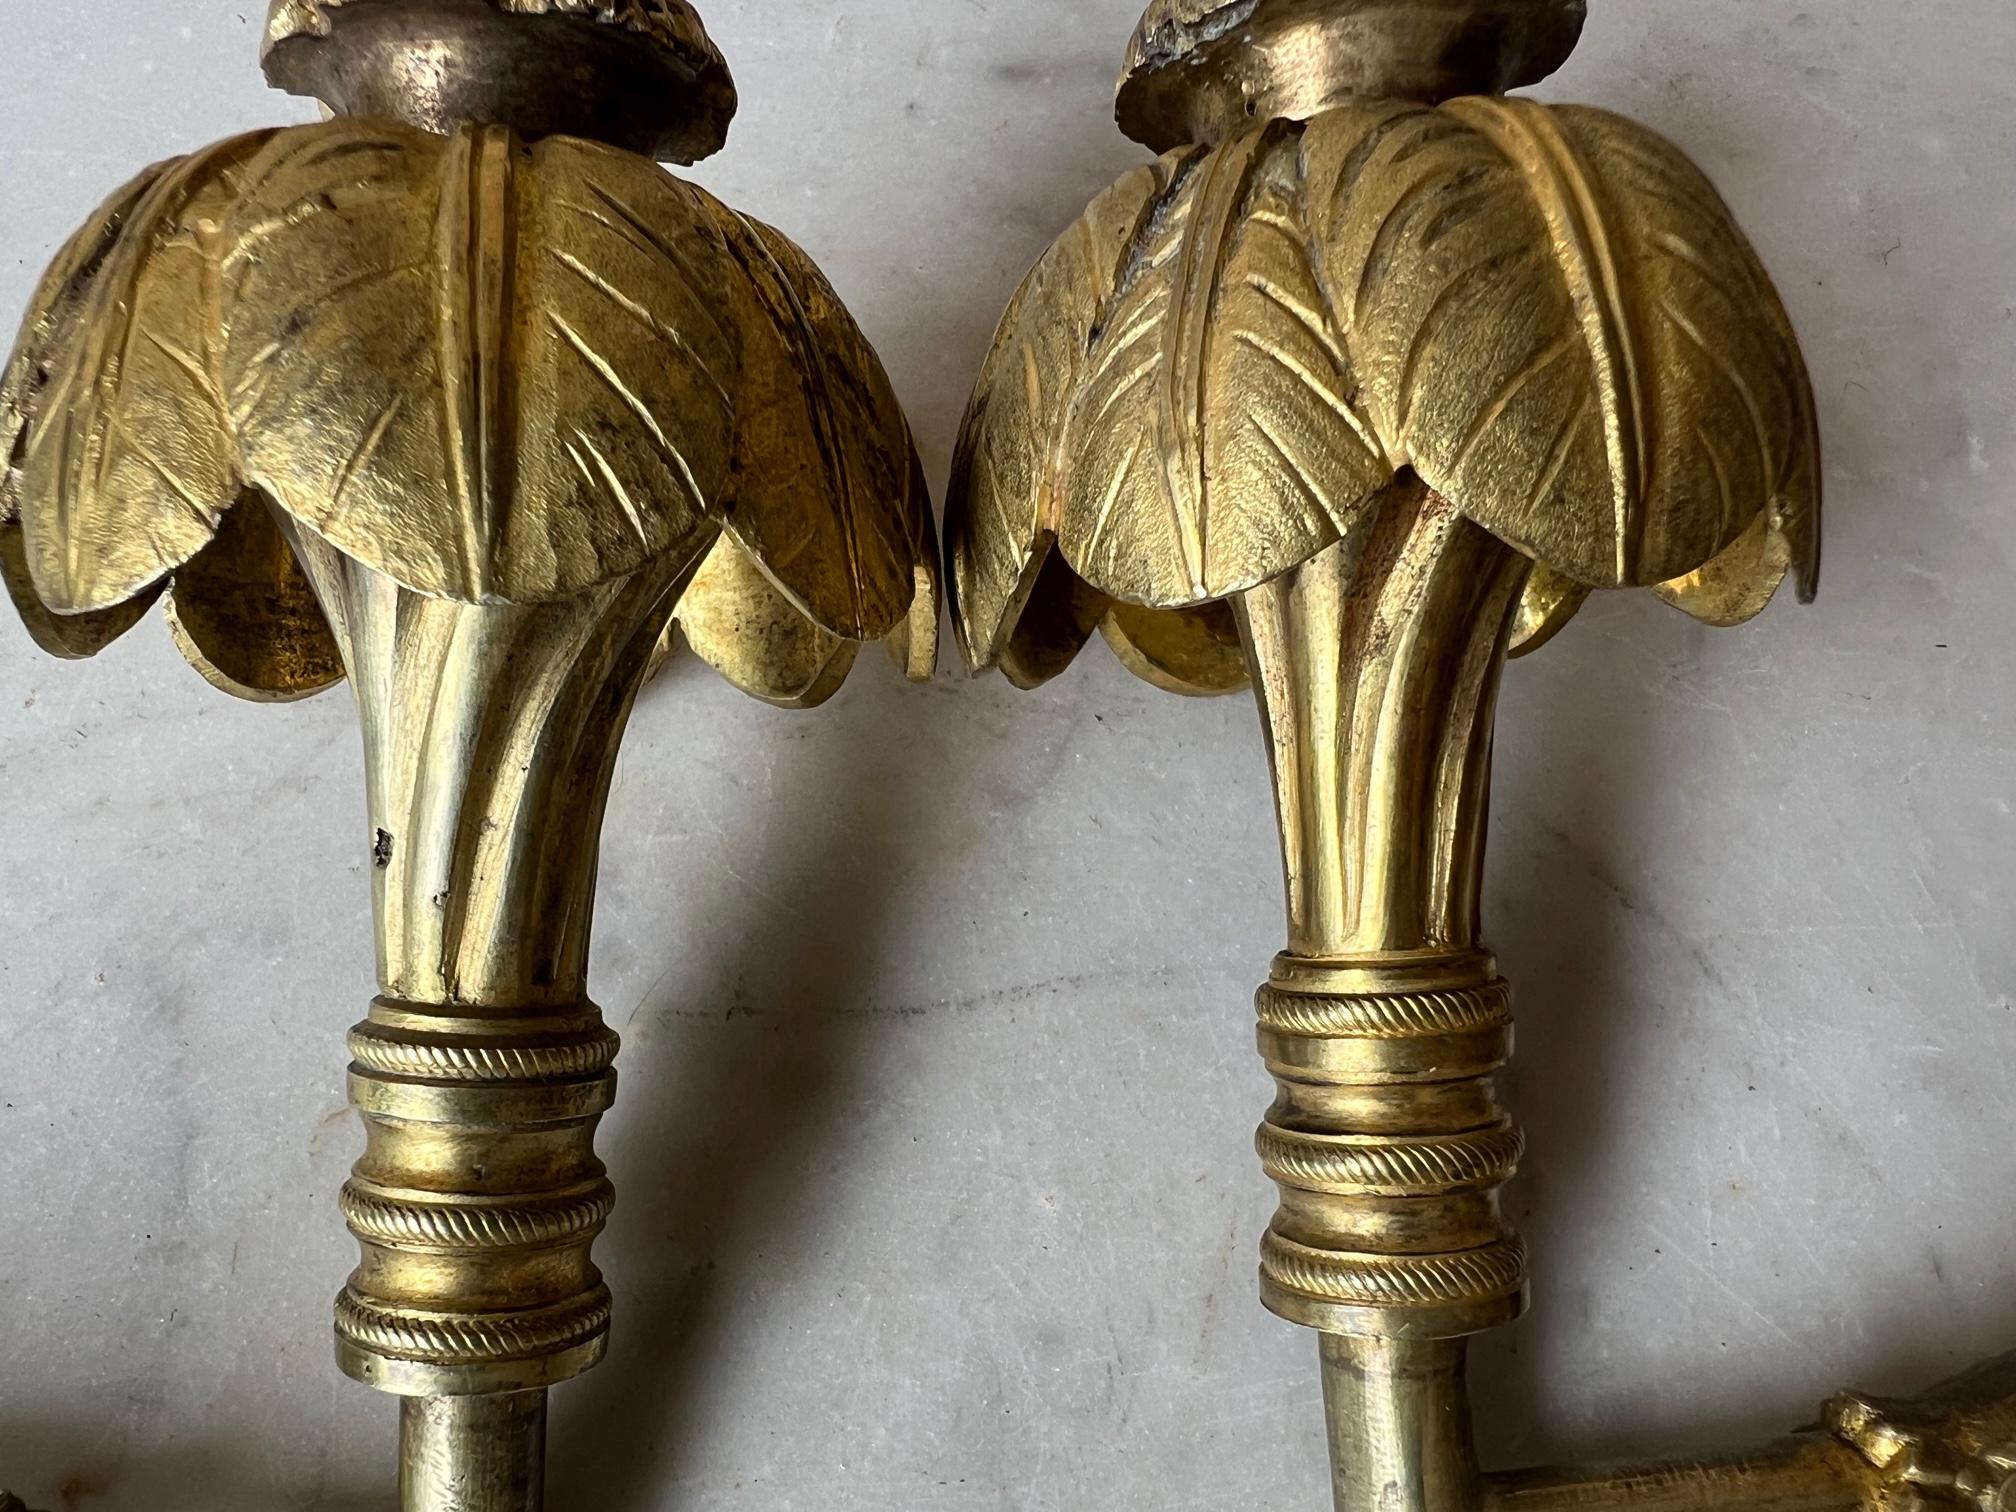 French Provincial Antique French Brass Curtain Tie Backs, Set of 2